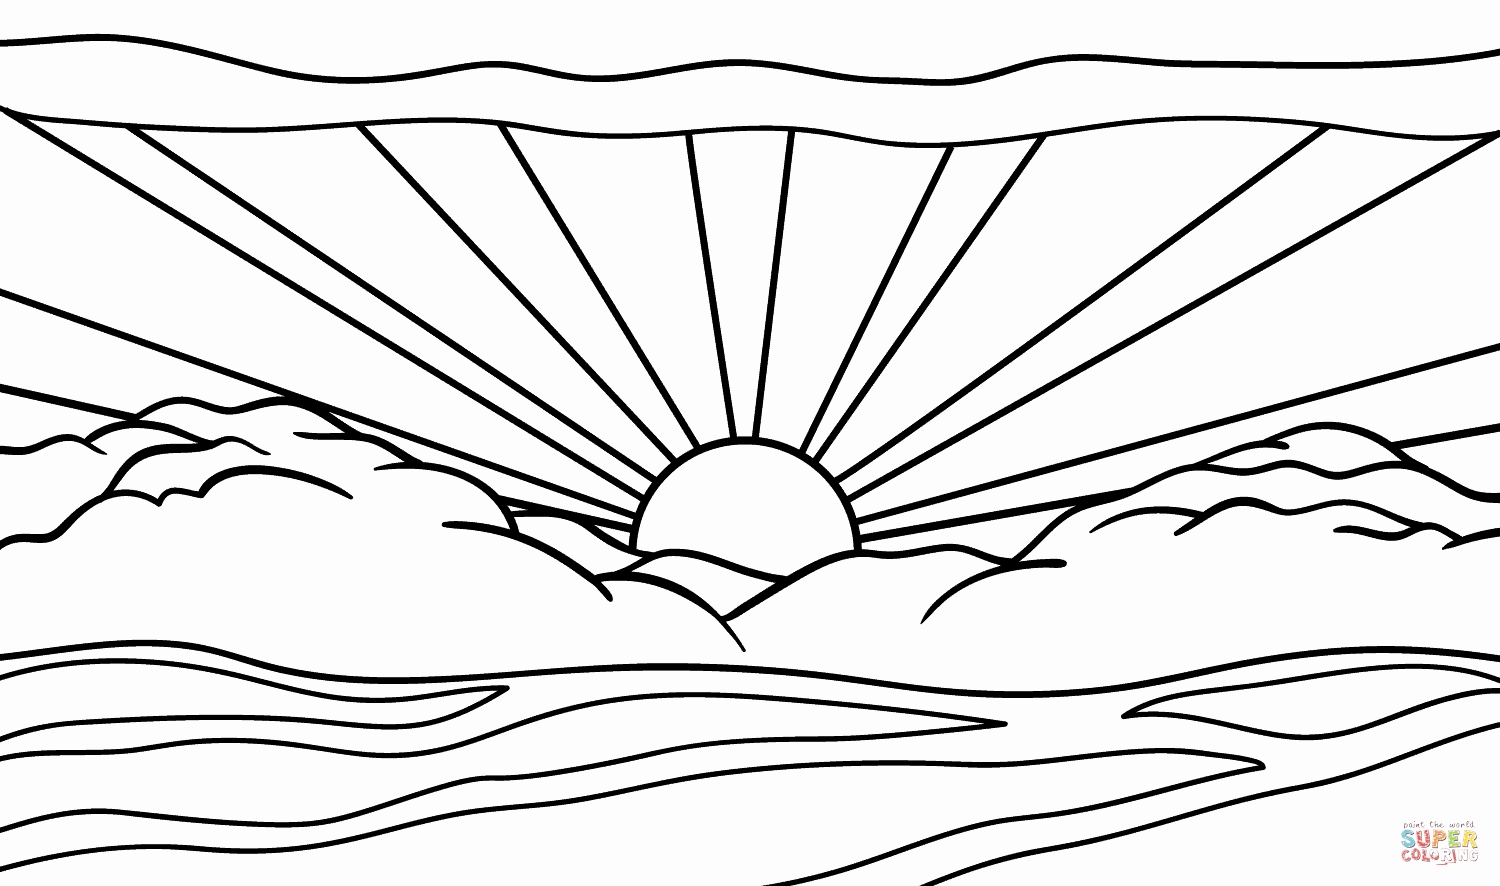 Sunrise Coloring Page at GetColorings.com | Free printable ...